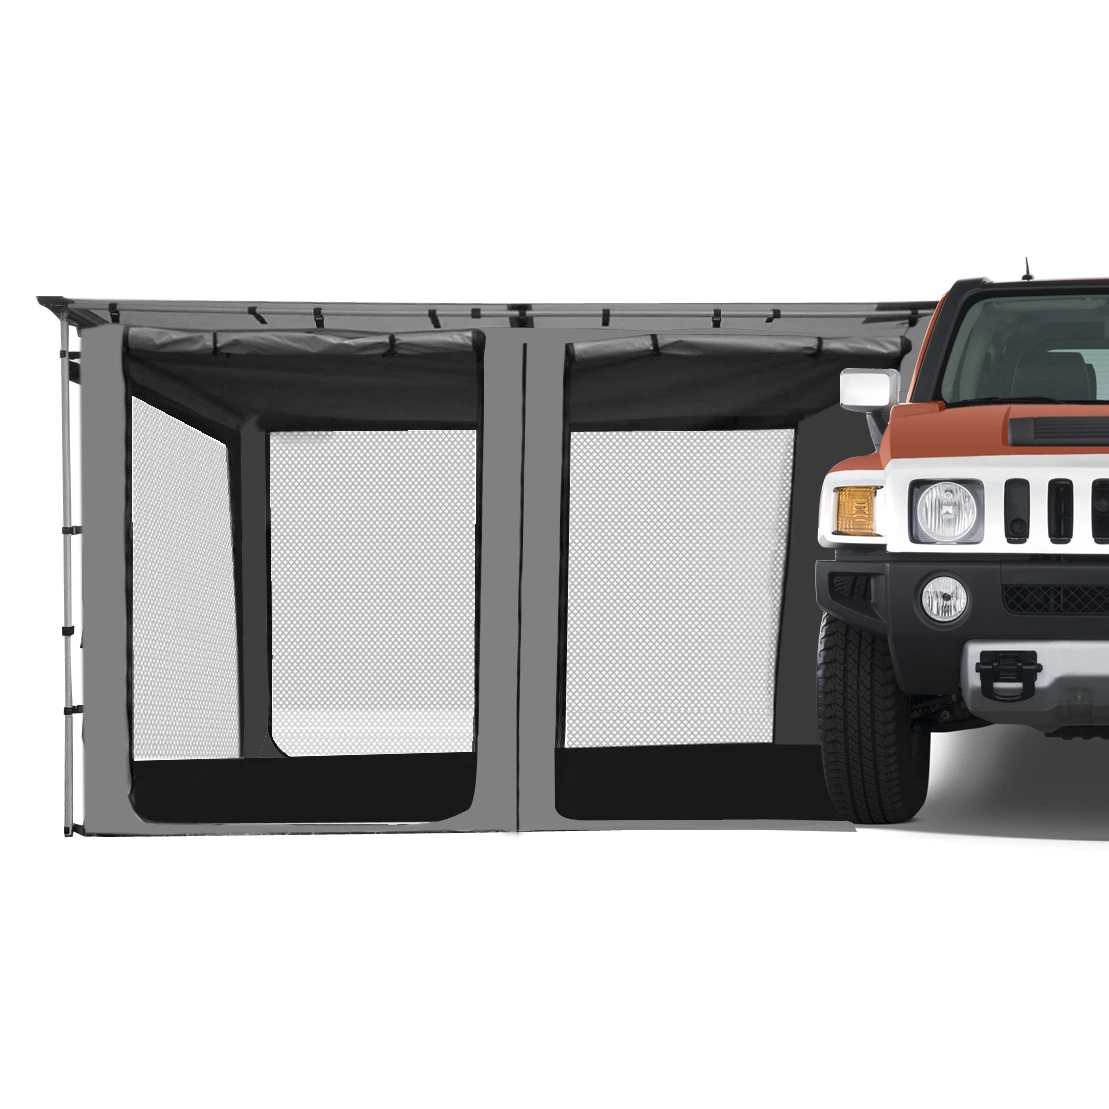 Car Side Annex Mesh Room Best Sell Cheap Price Retractable 4WD Awnings